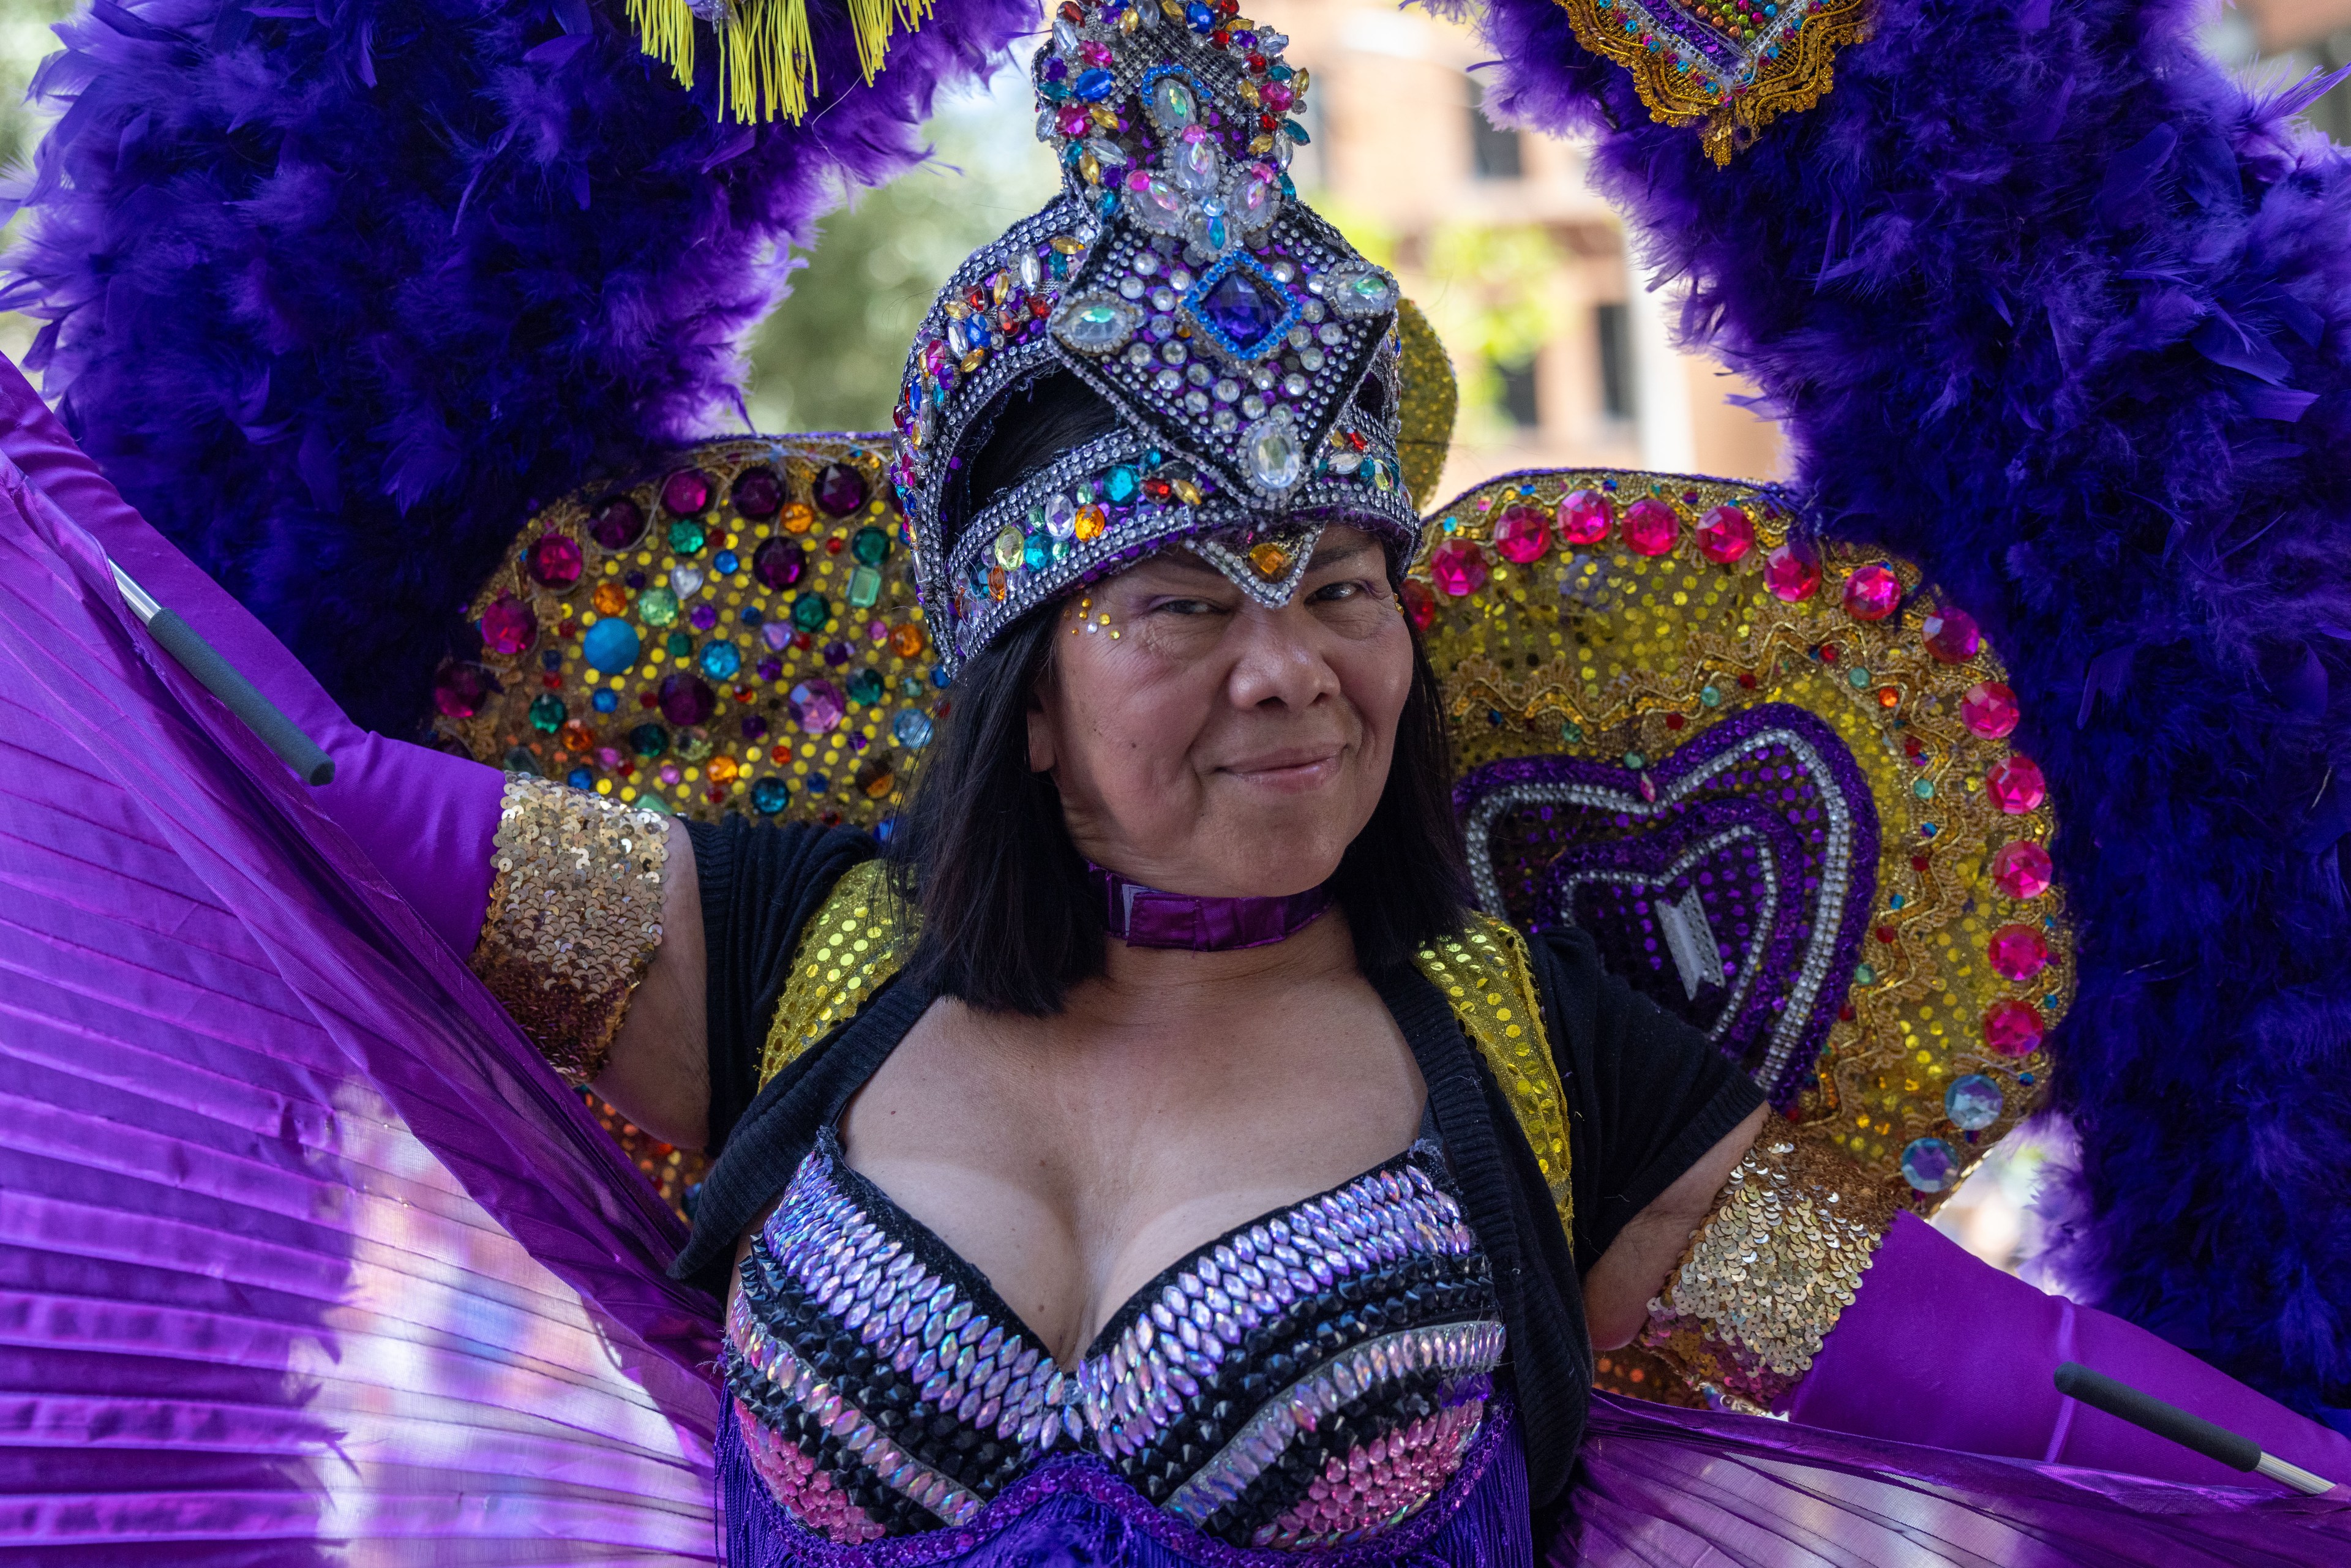 A person is wearing an embellished, colorful costume with purple feathers, sequins, and jewels, smiling confidently. They have a matching elaborate headpiece and winged decorations.